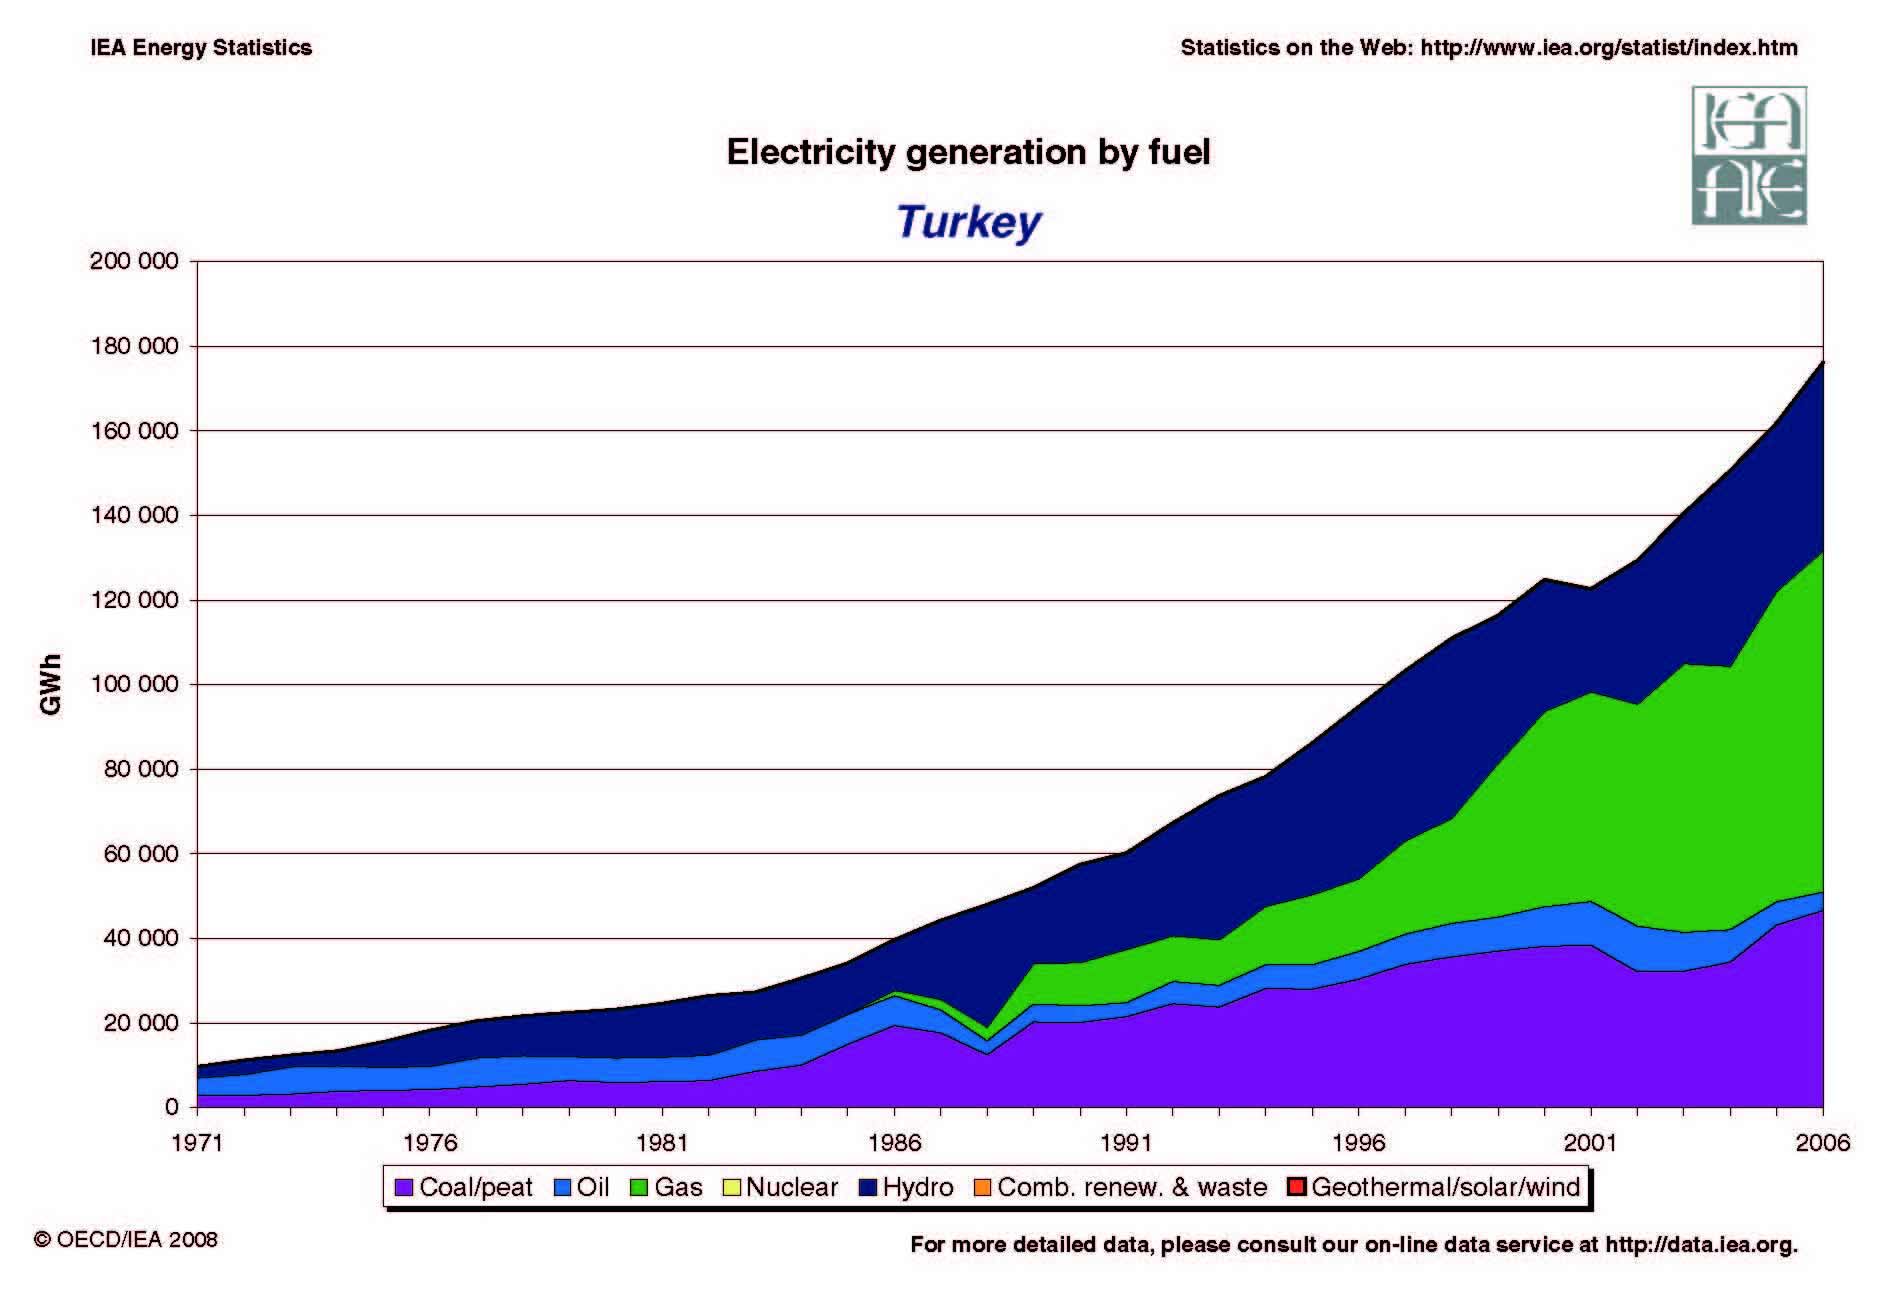 Turkey Evolution of Electricity Generation by Fuel 1971 - 2005